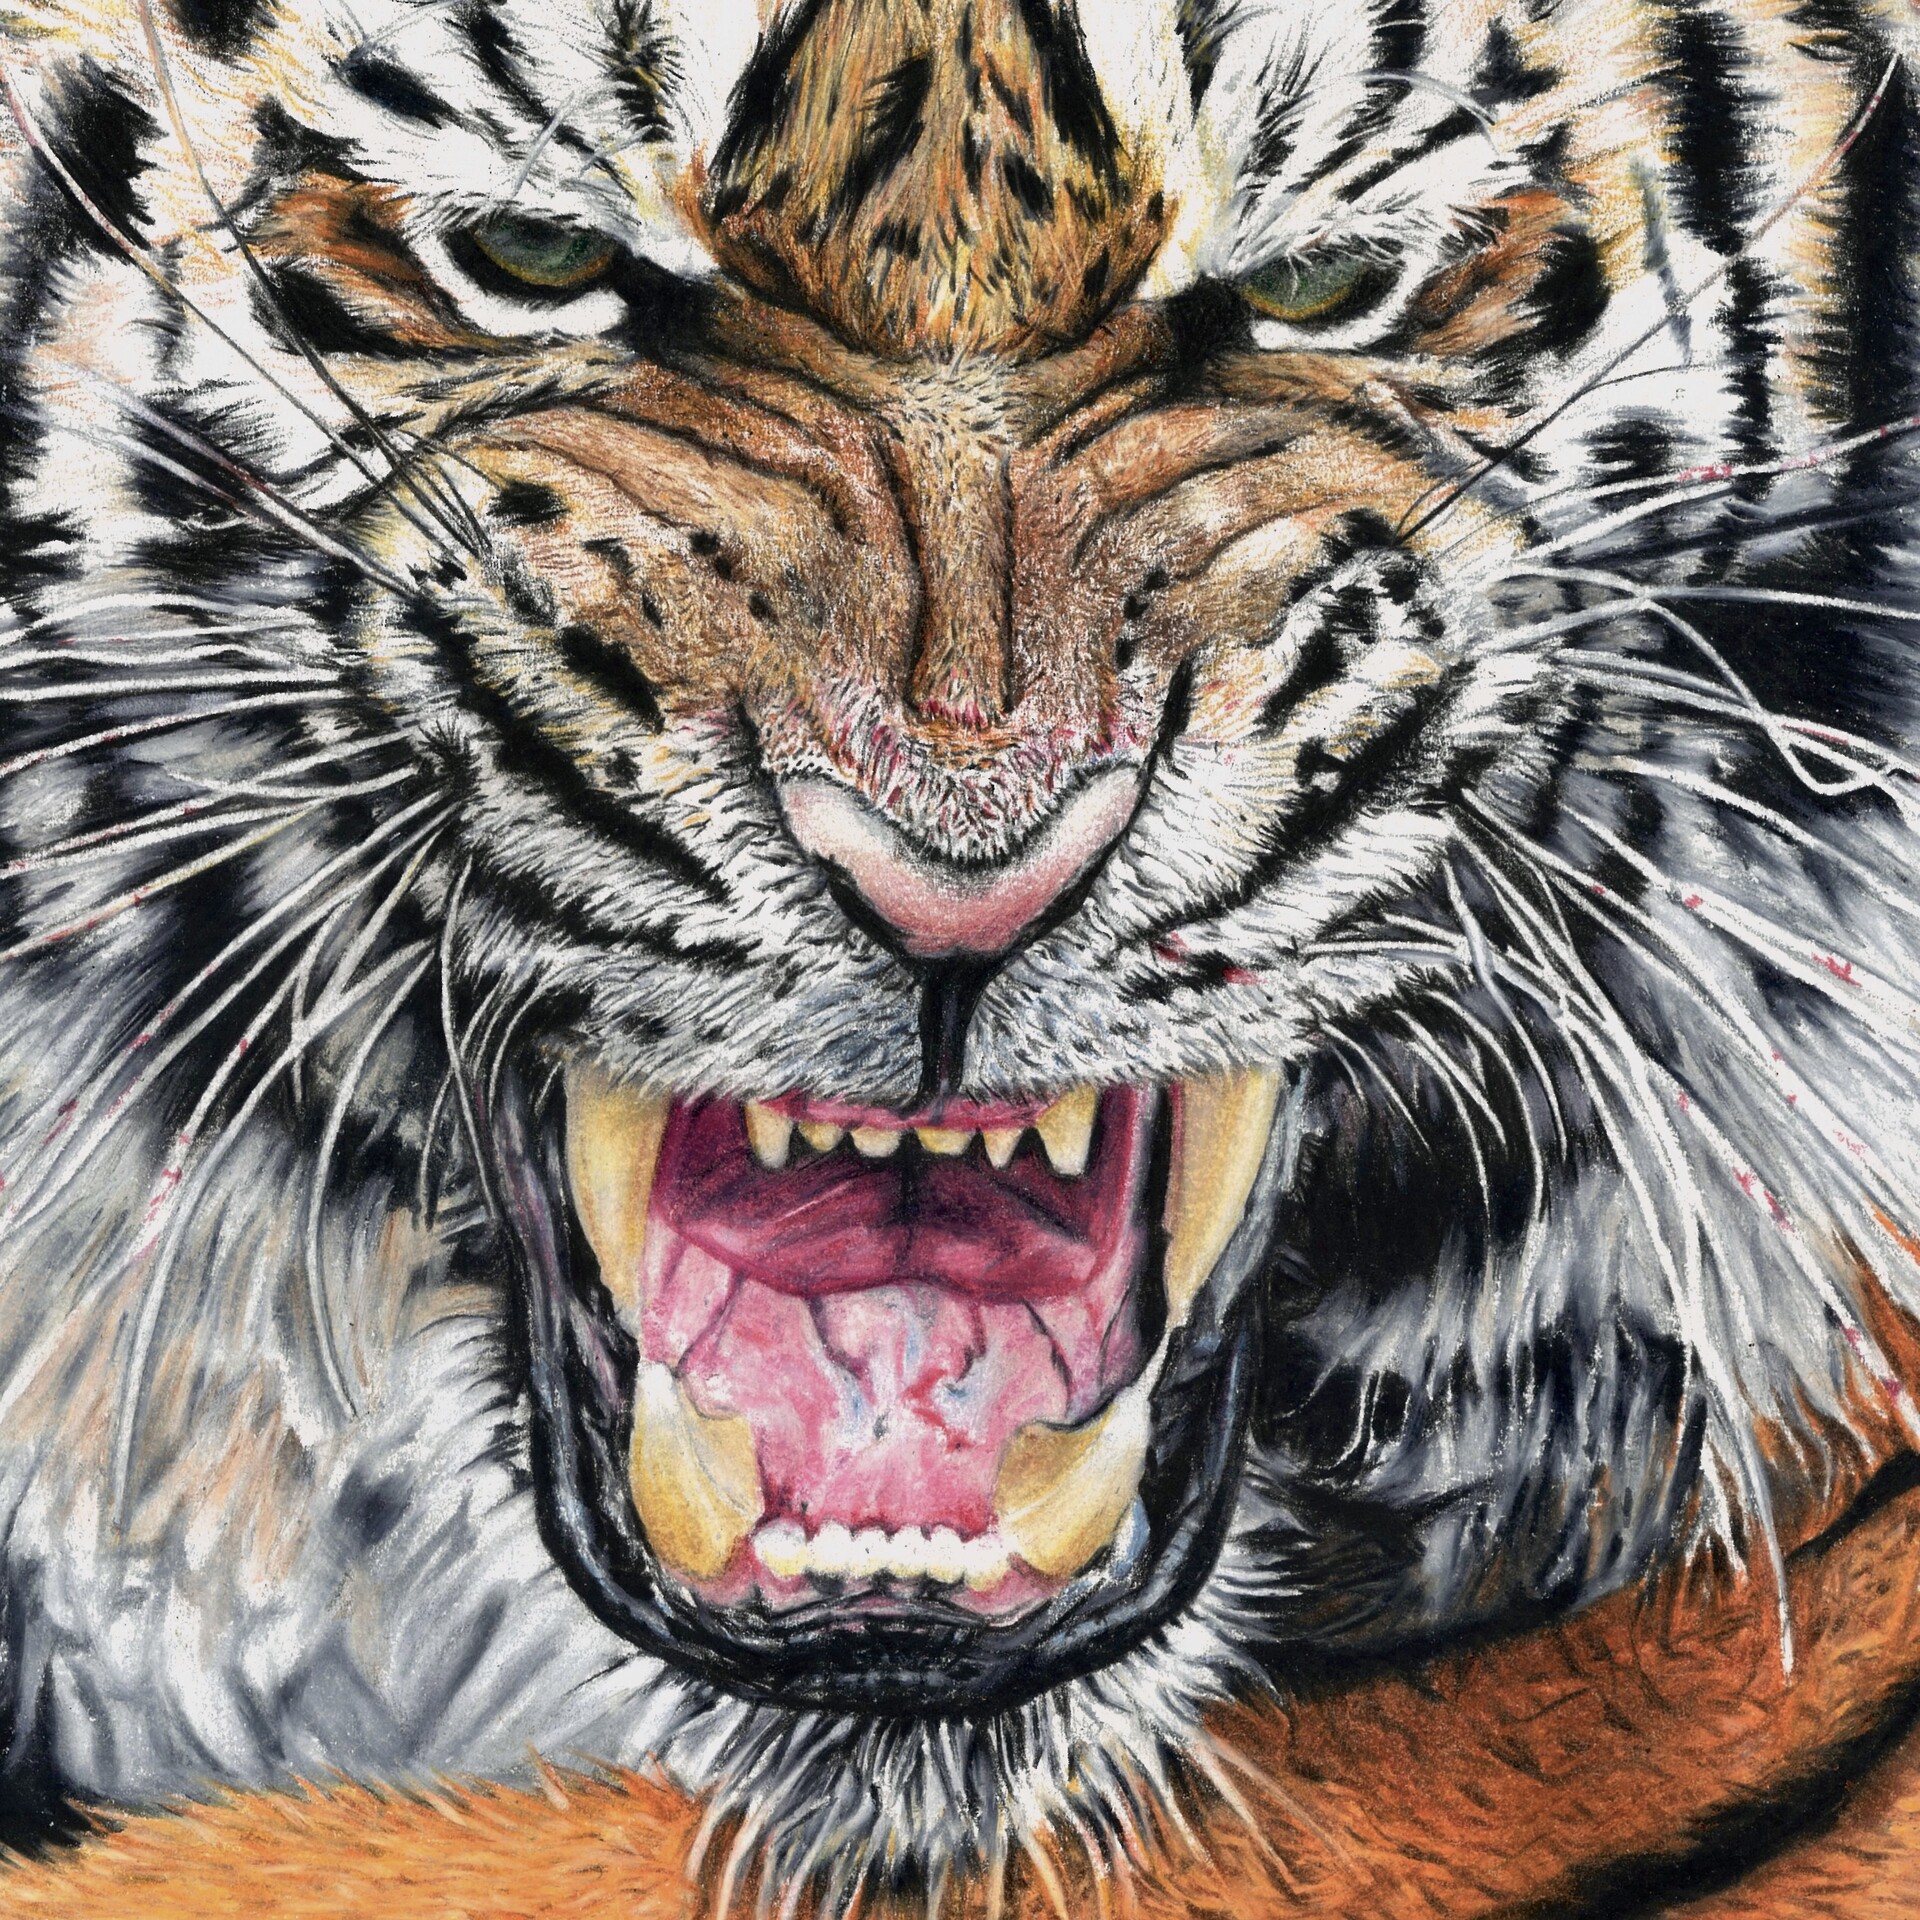 Color Engrave Ink Draw Russian Tiger Illustration Stock Photo, Picture and  Royalty Free Image. Image 52564759.